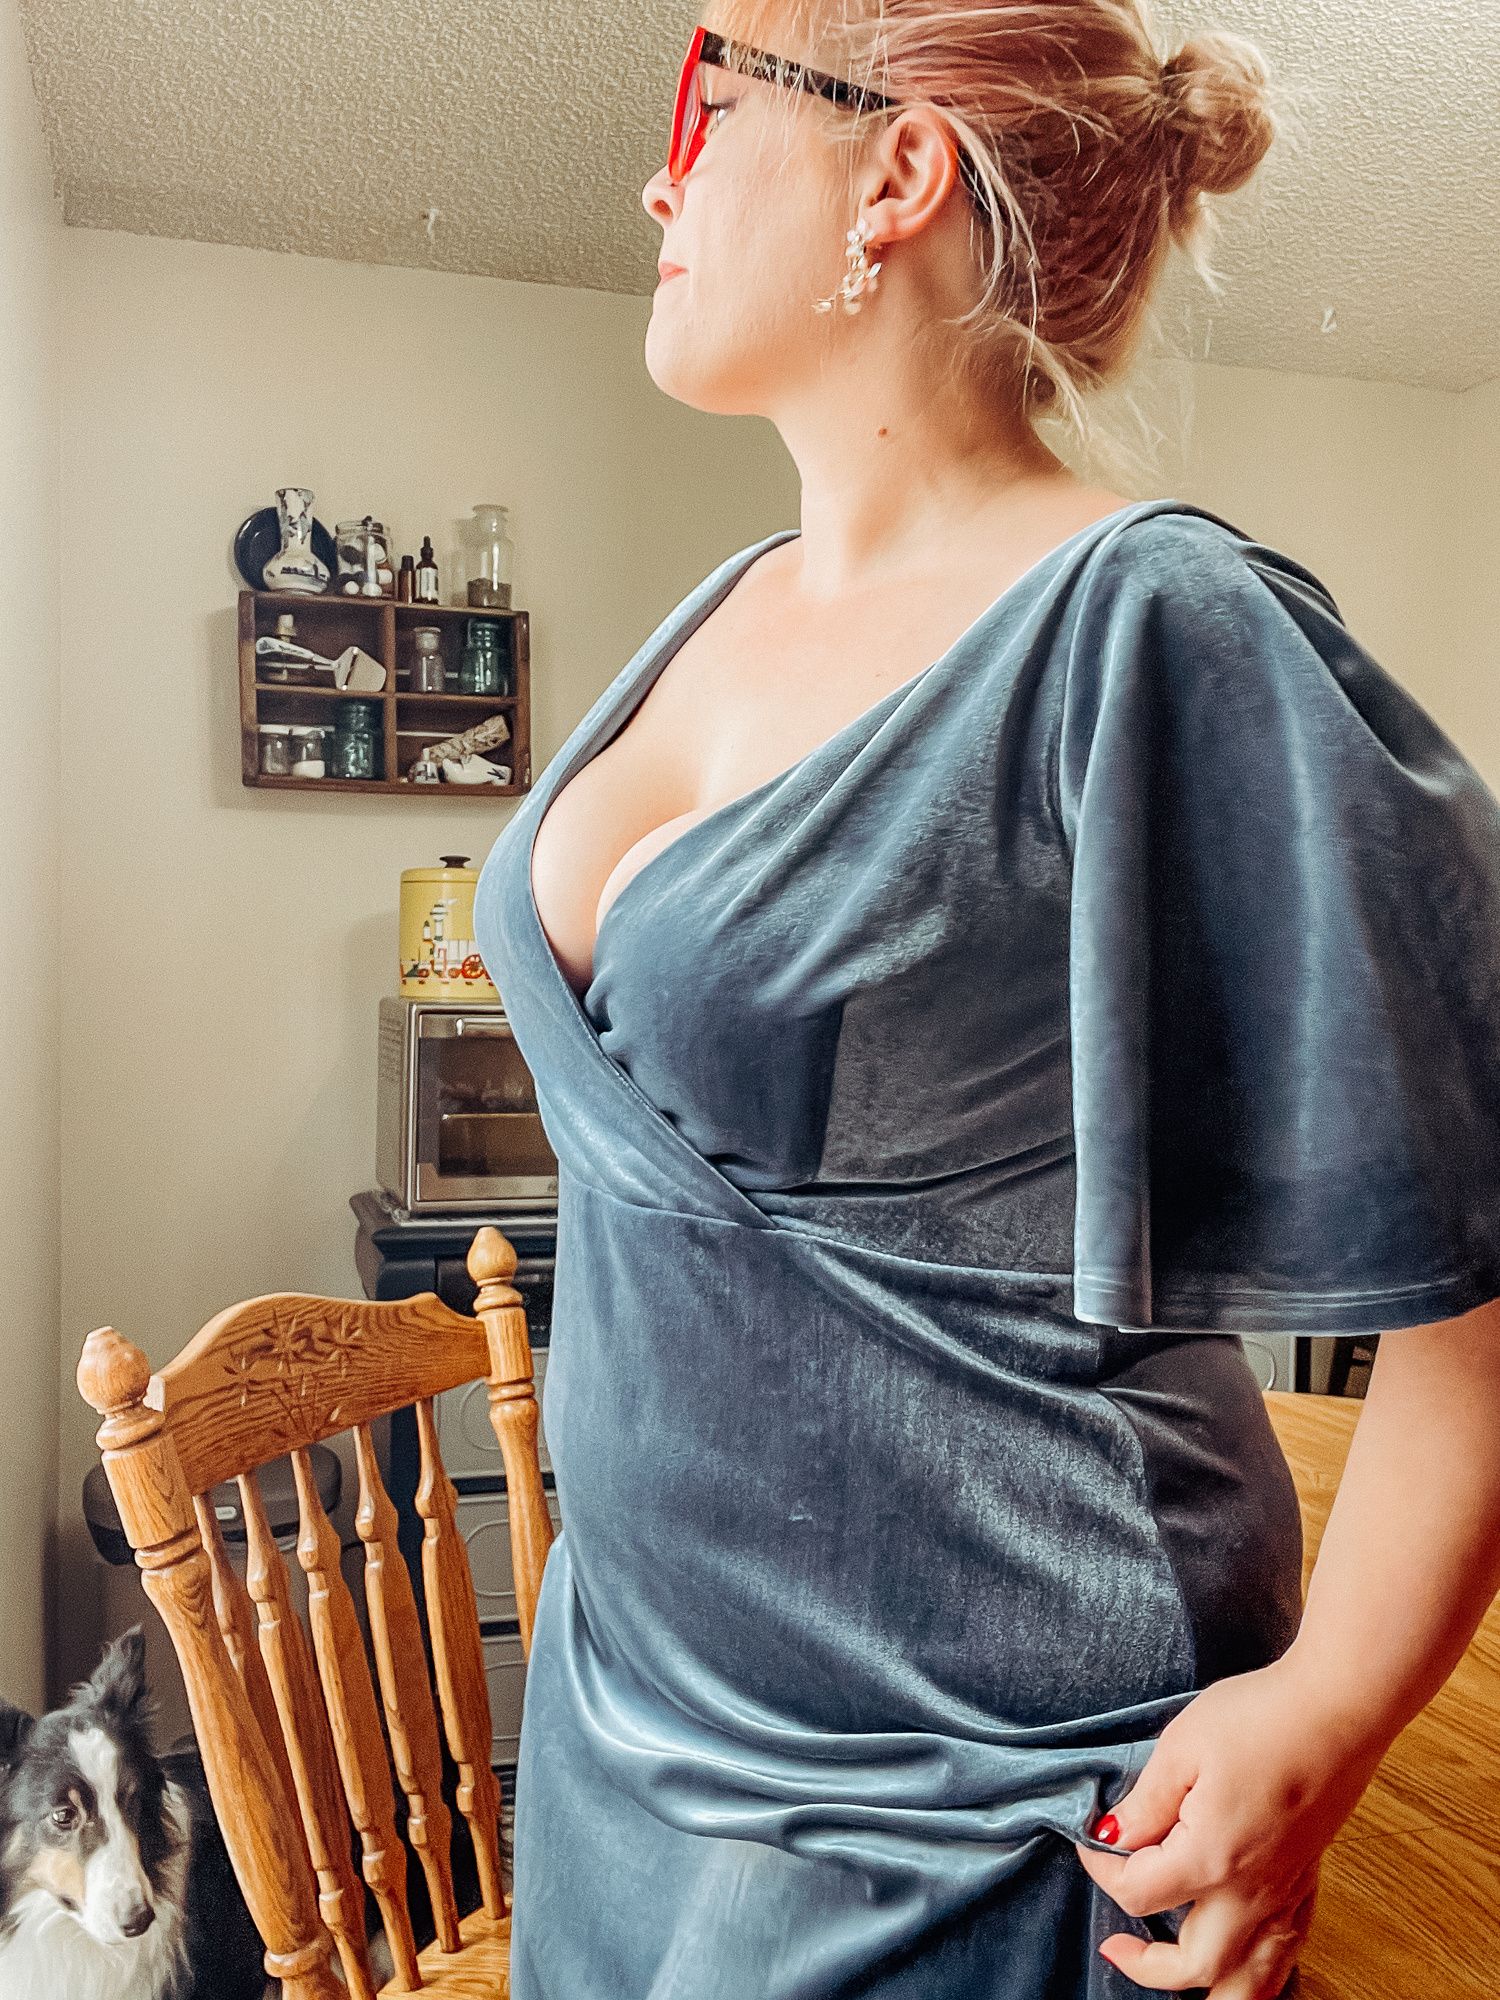 BBW in an evening gown does the dishes with gloves on